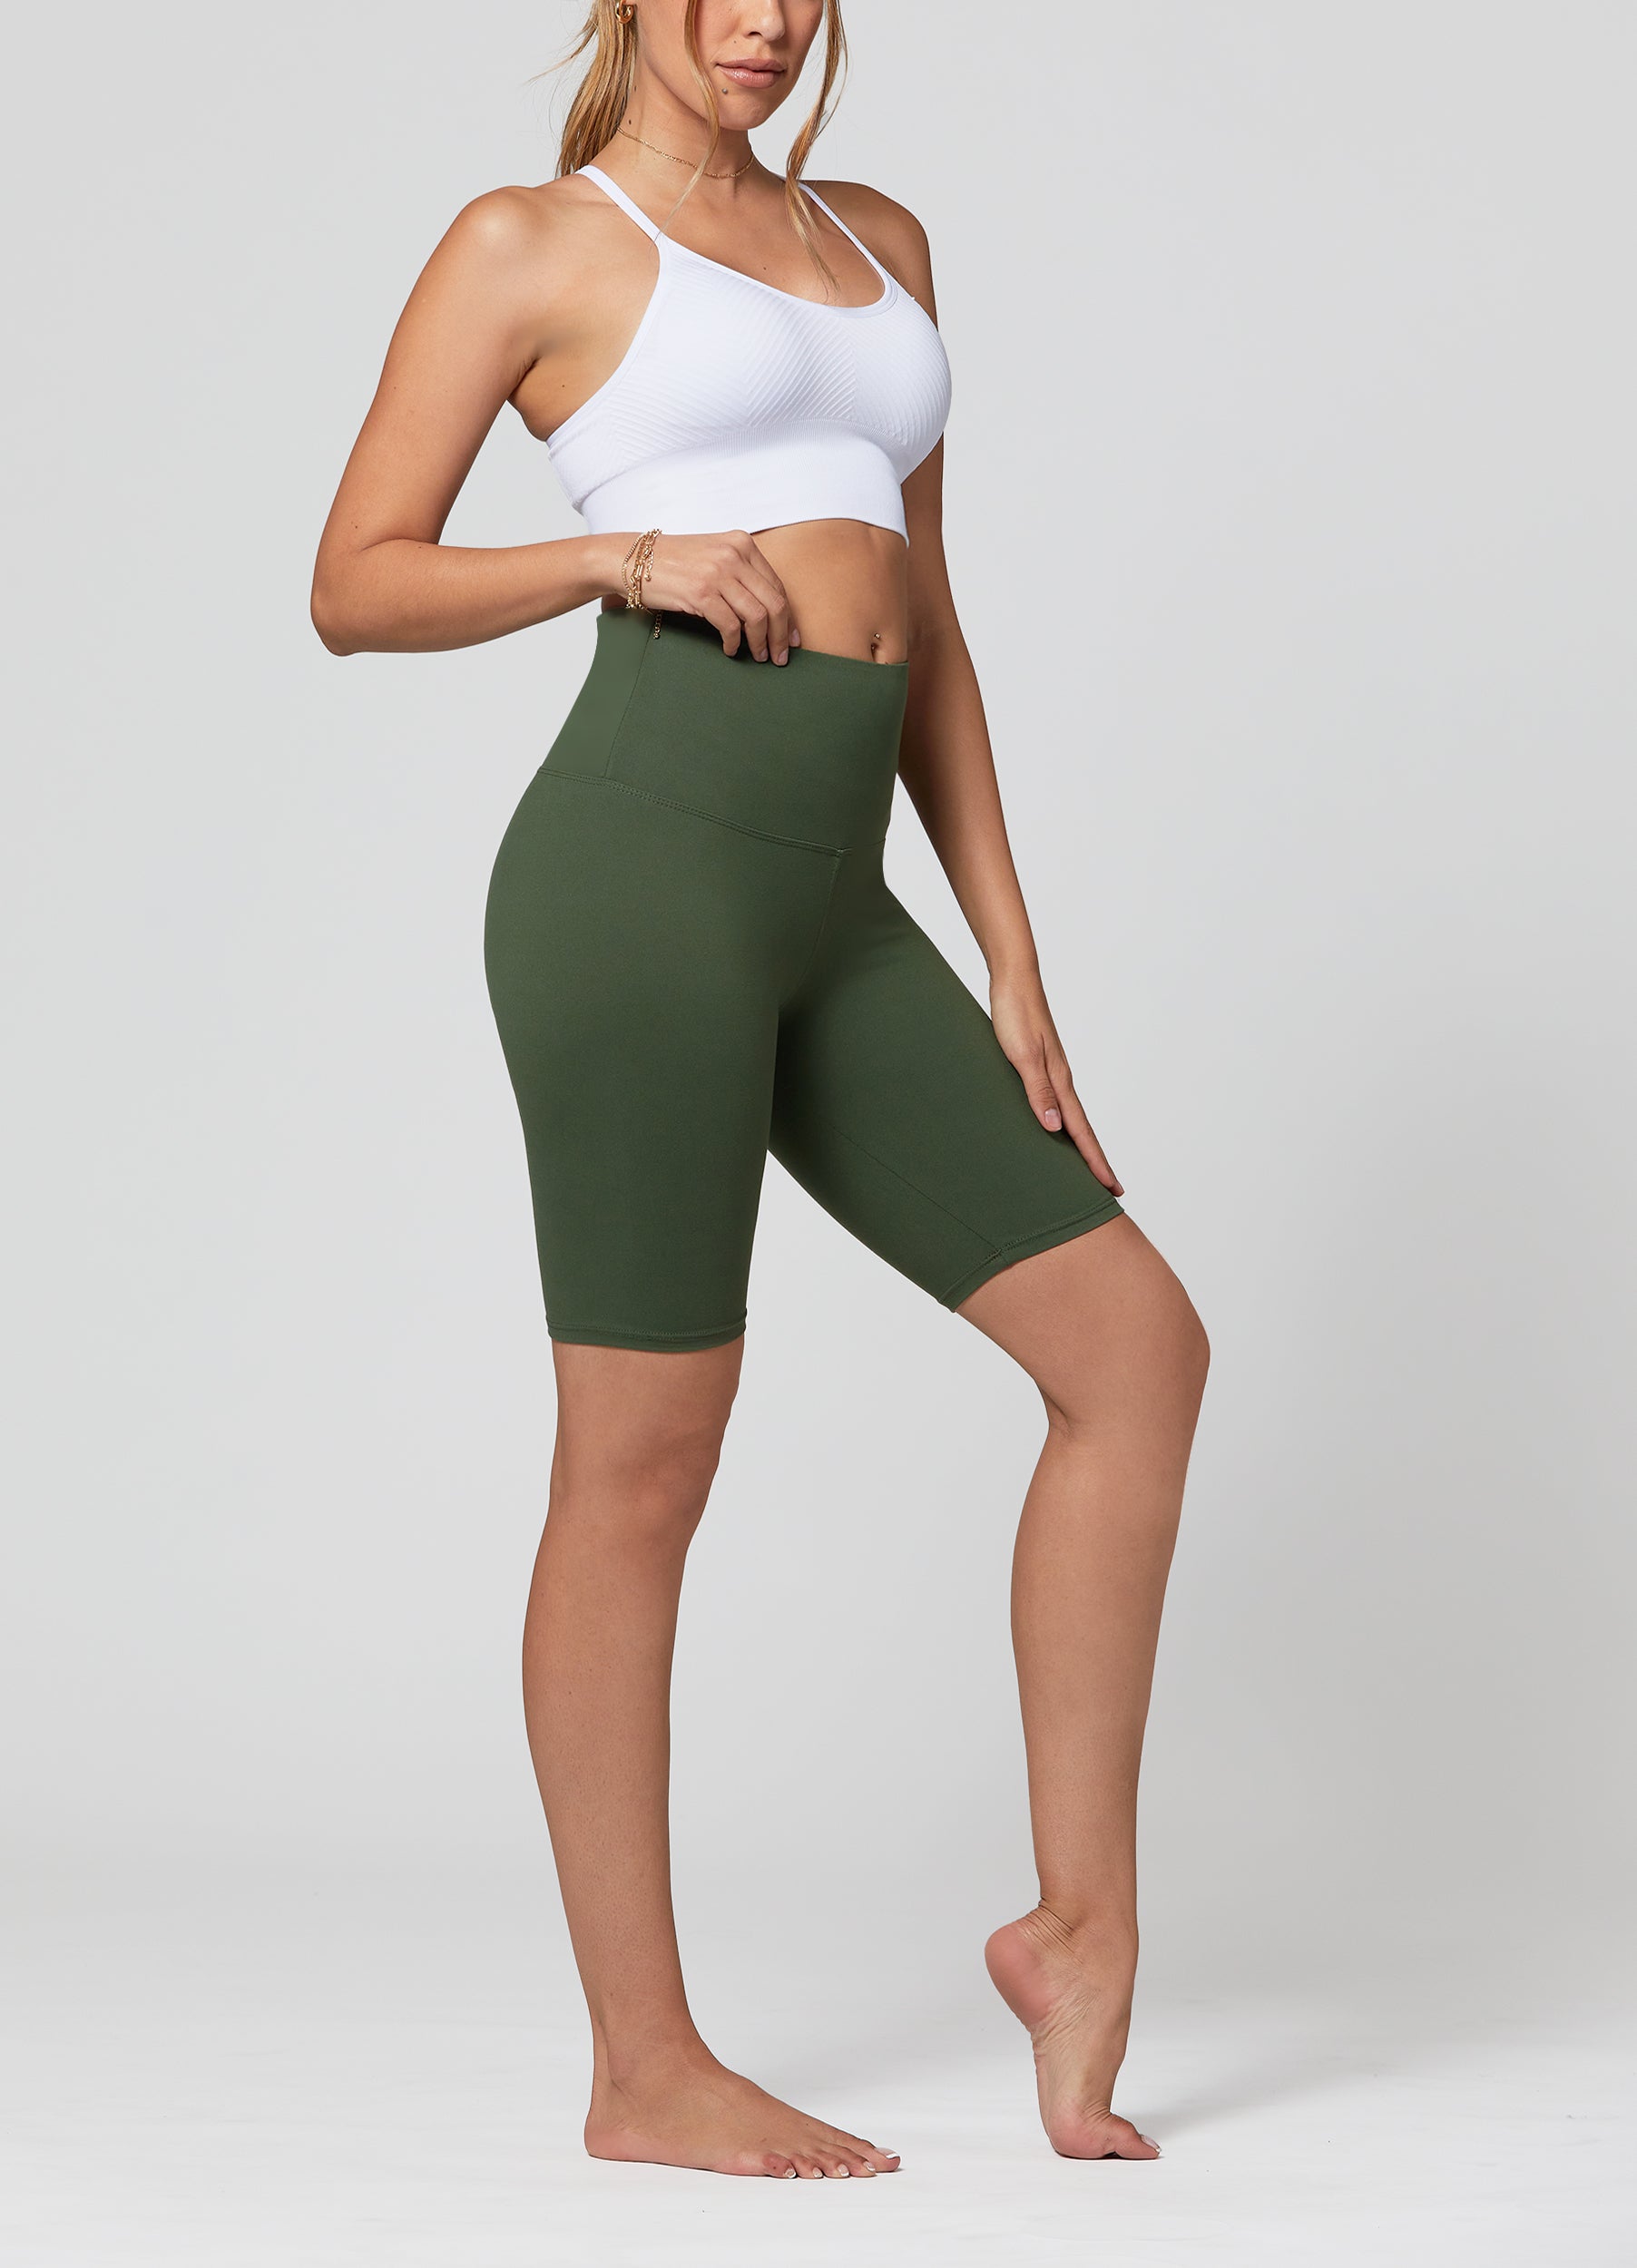 Ivy Super Ultra Soft High Waisted Yoga Shorts - Conceited Co.